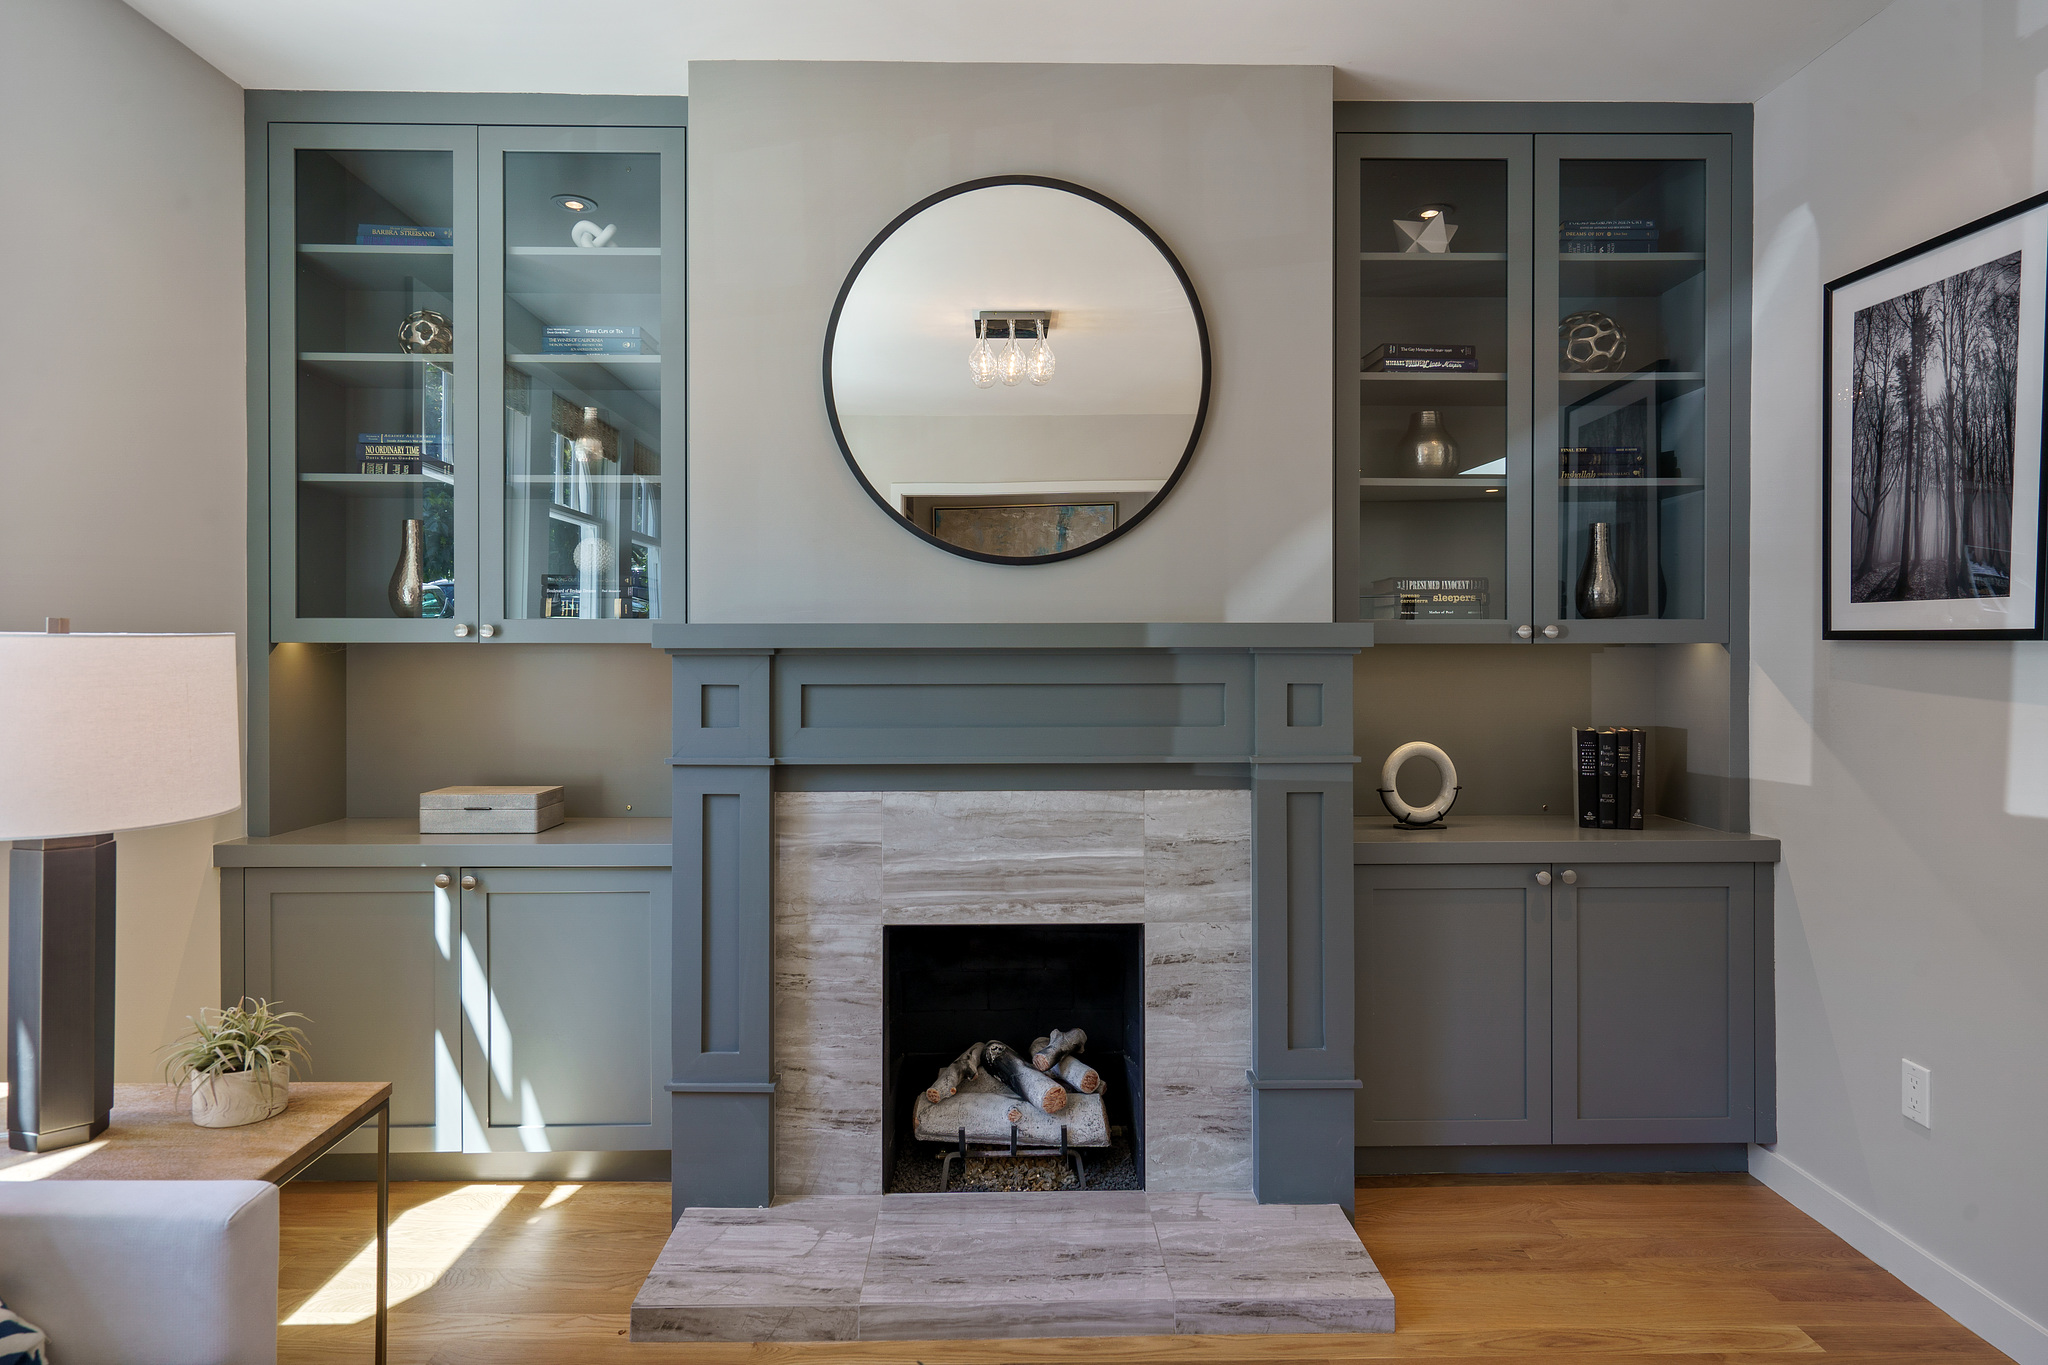 Property Photo: Close-up of the fireplace, showing a tile front, wood mantel and built-in cabinetry 